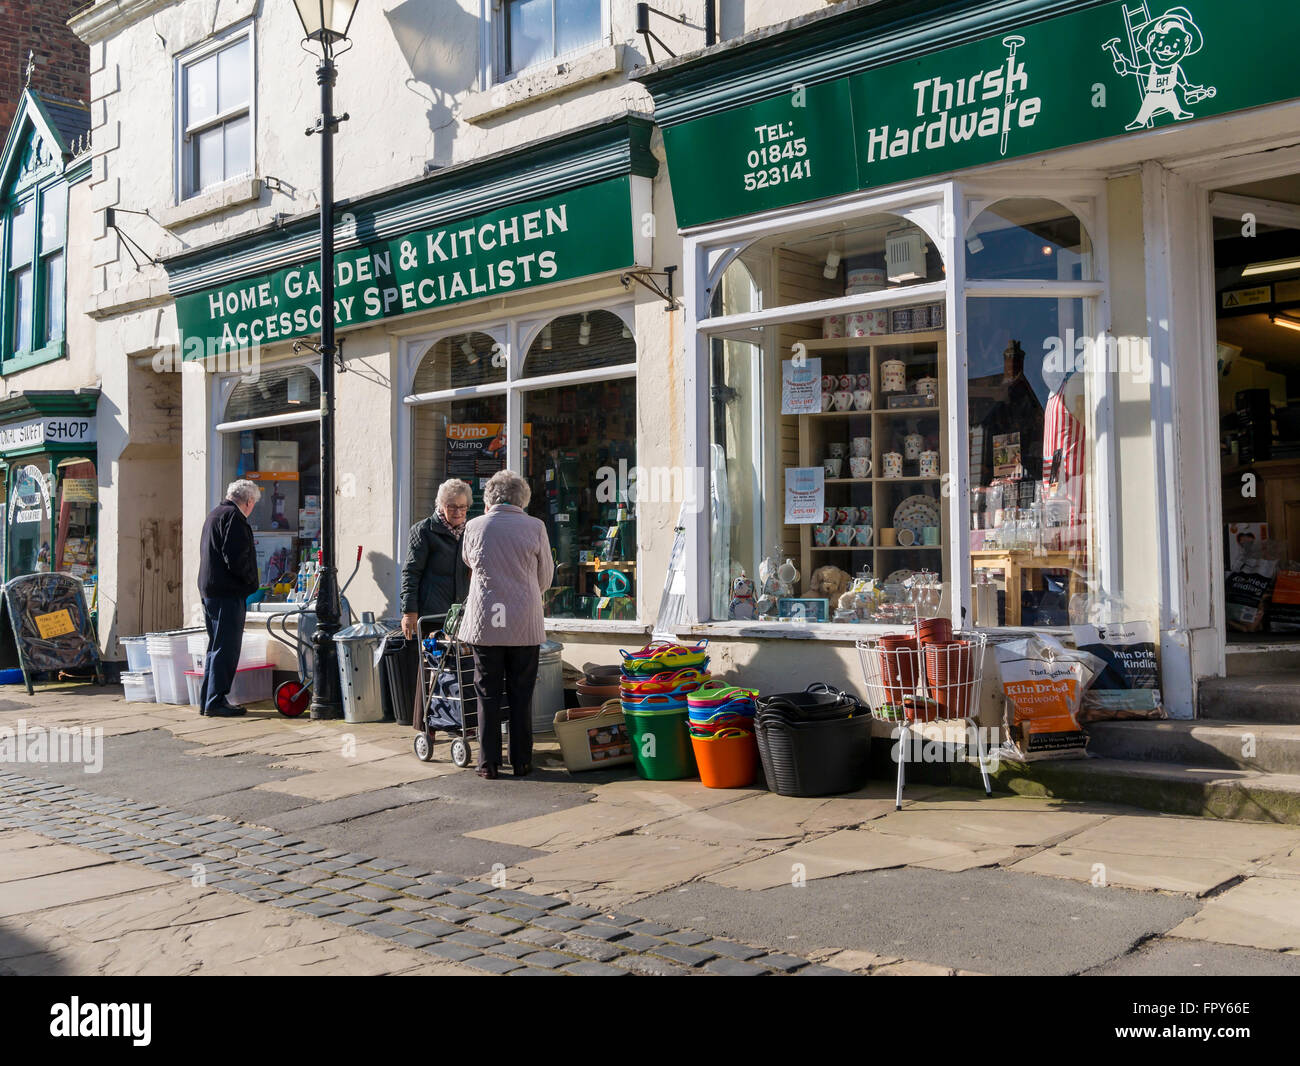 Women talking outside outside a hardware shop with goods displayed in a pedestrianised area of Thirsk Market Place Yorkshire Stock Photo